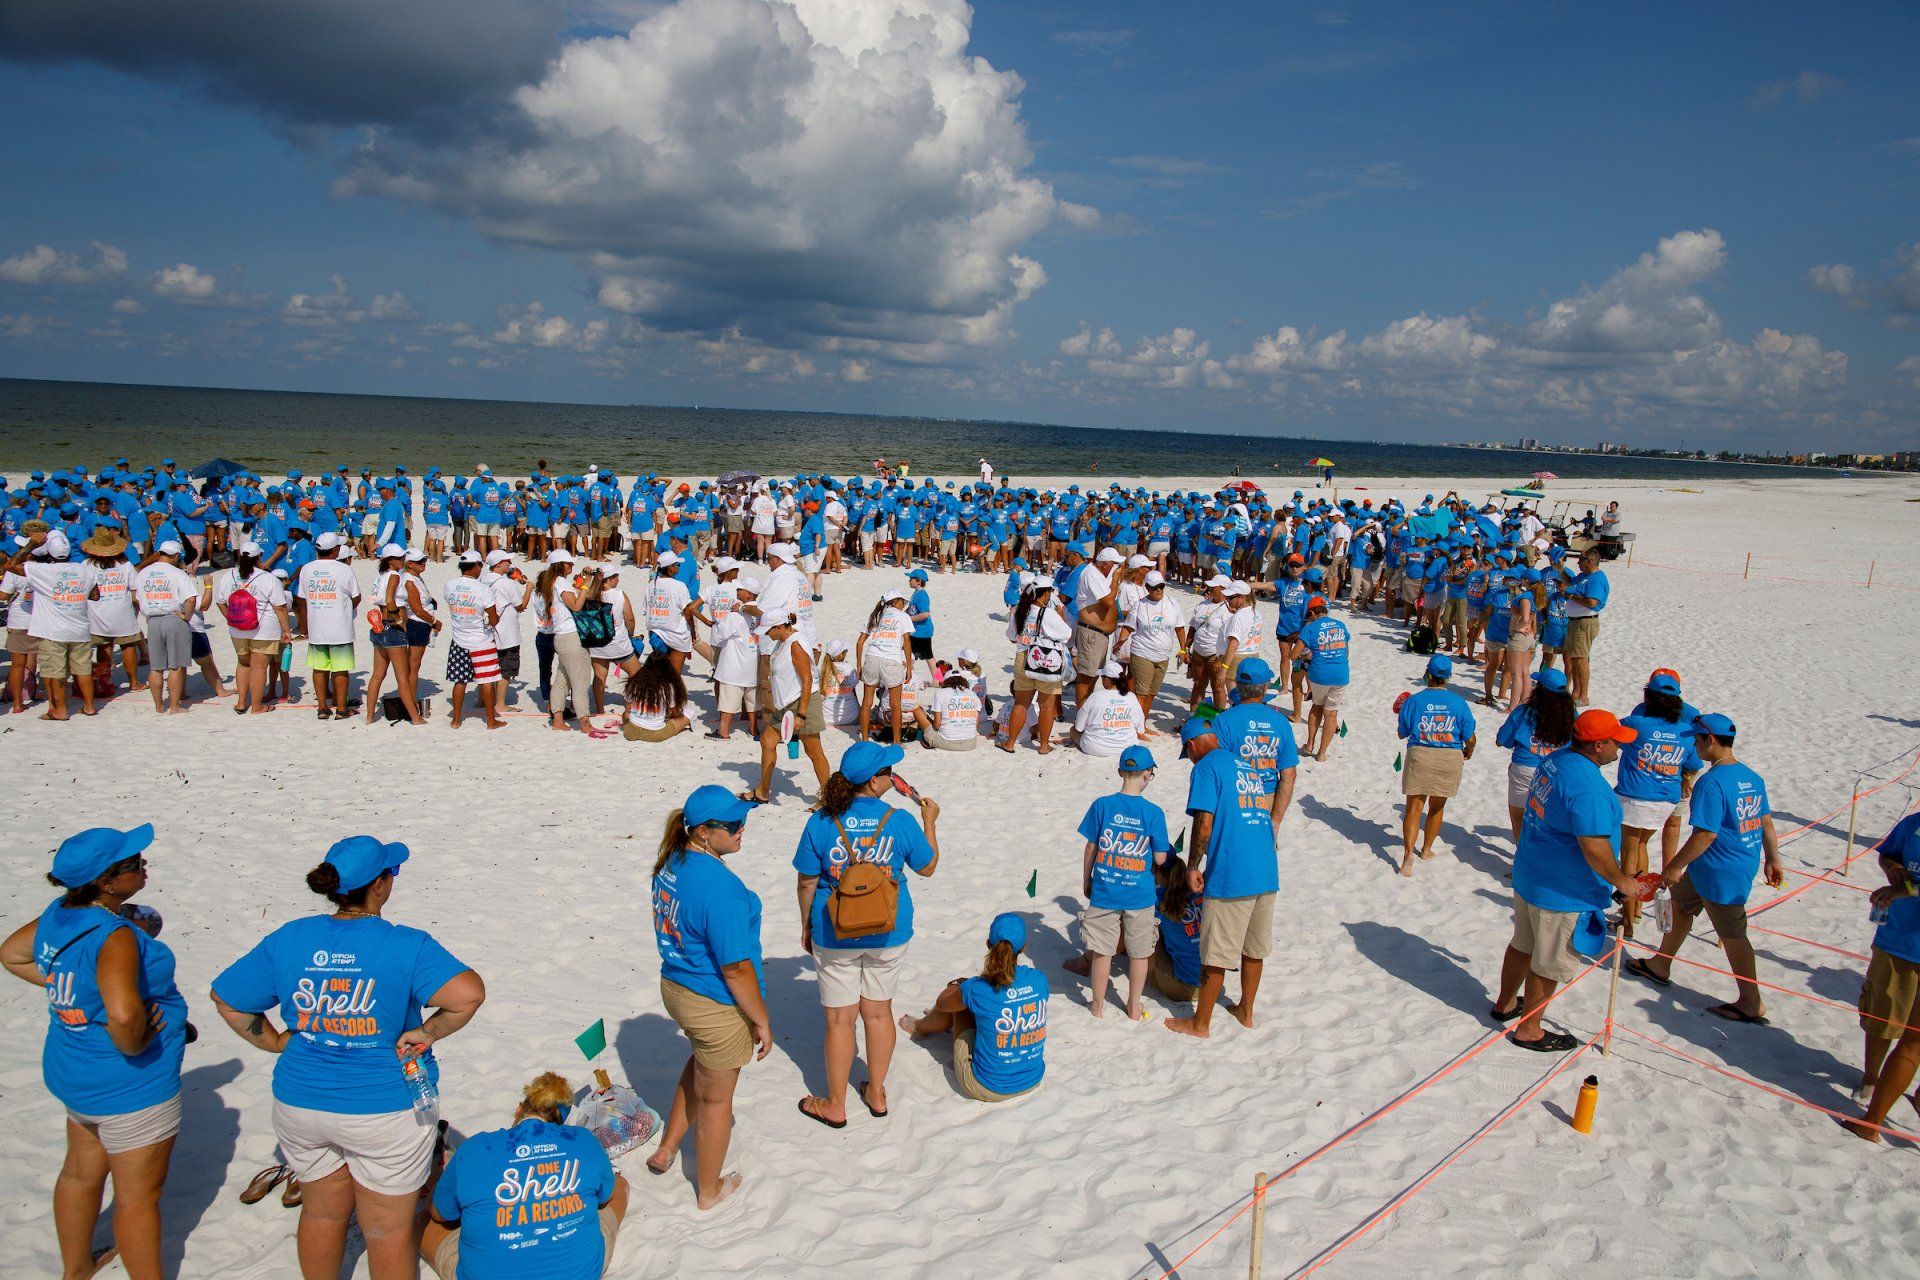 Largest human image of a seashell: world record set in Florida